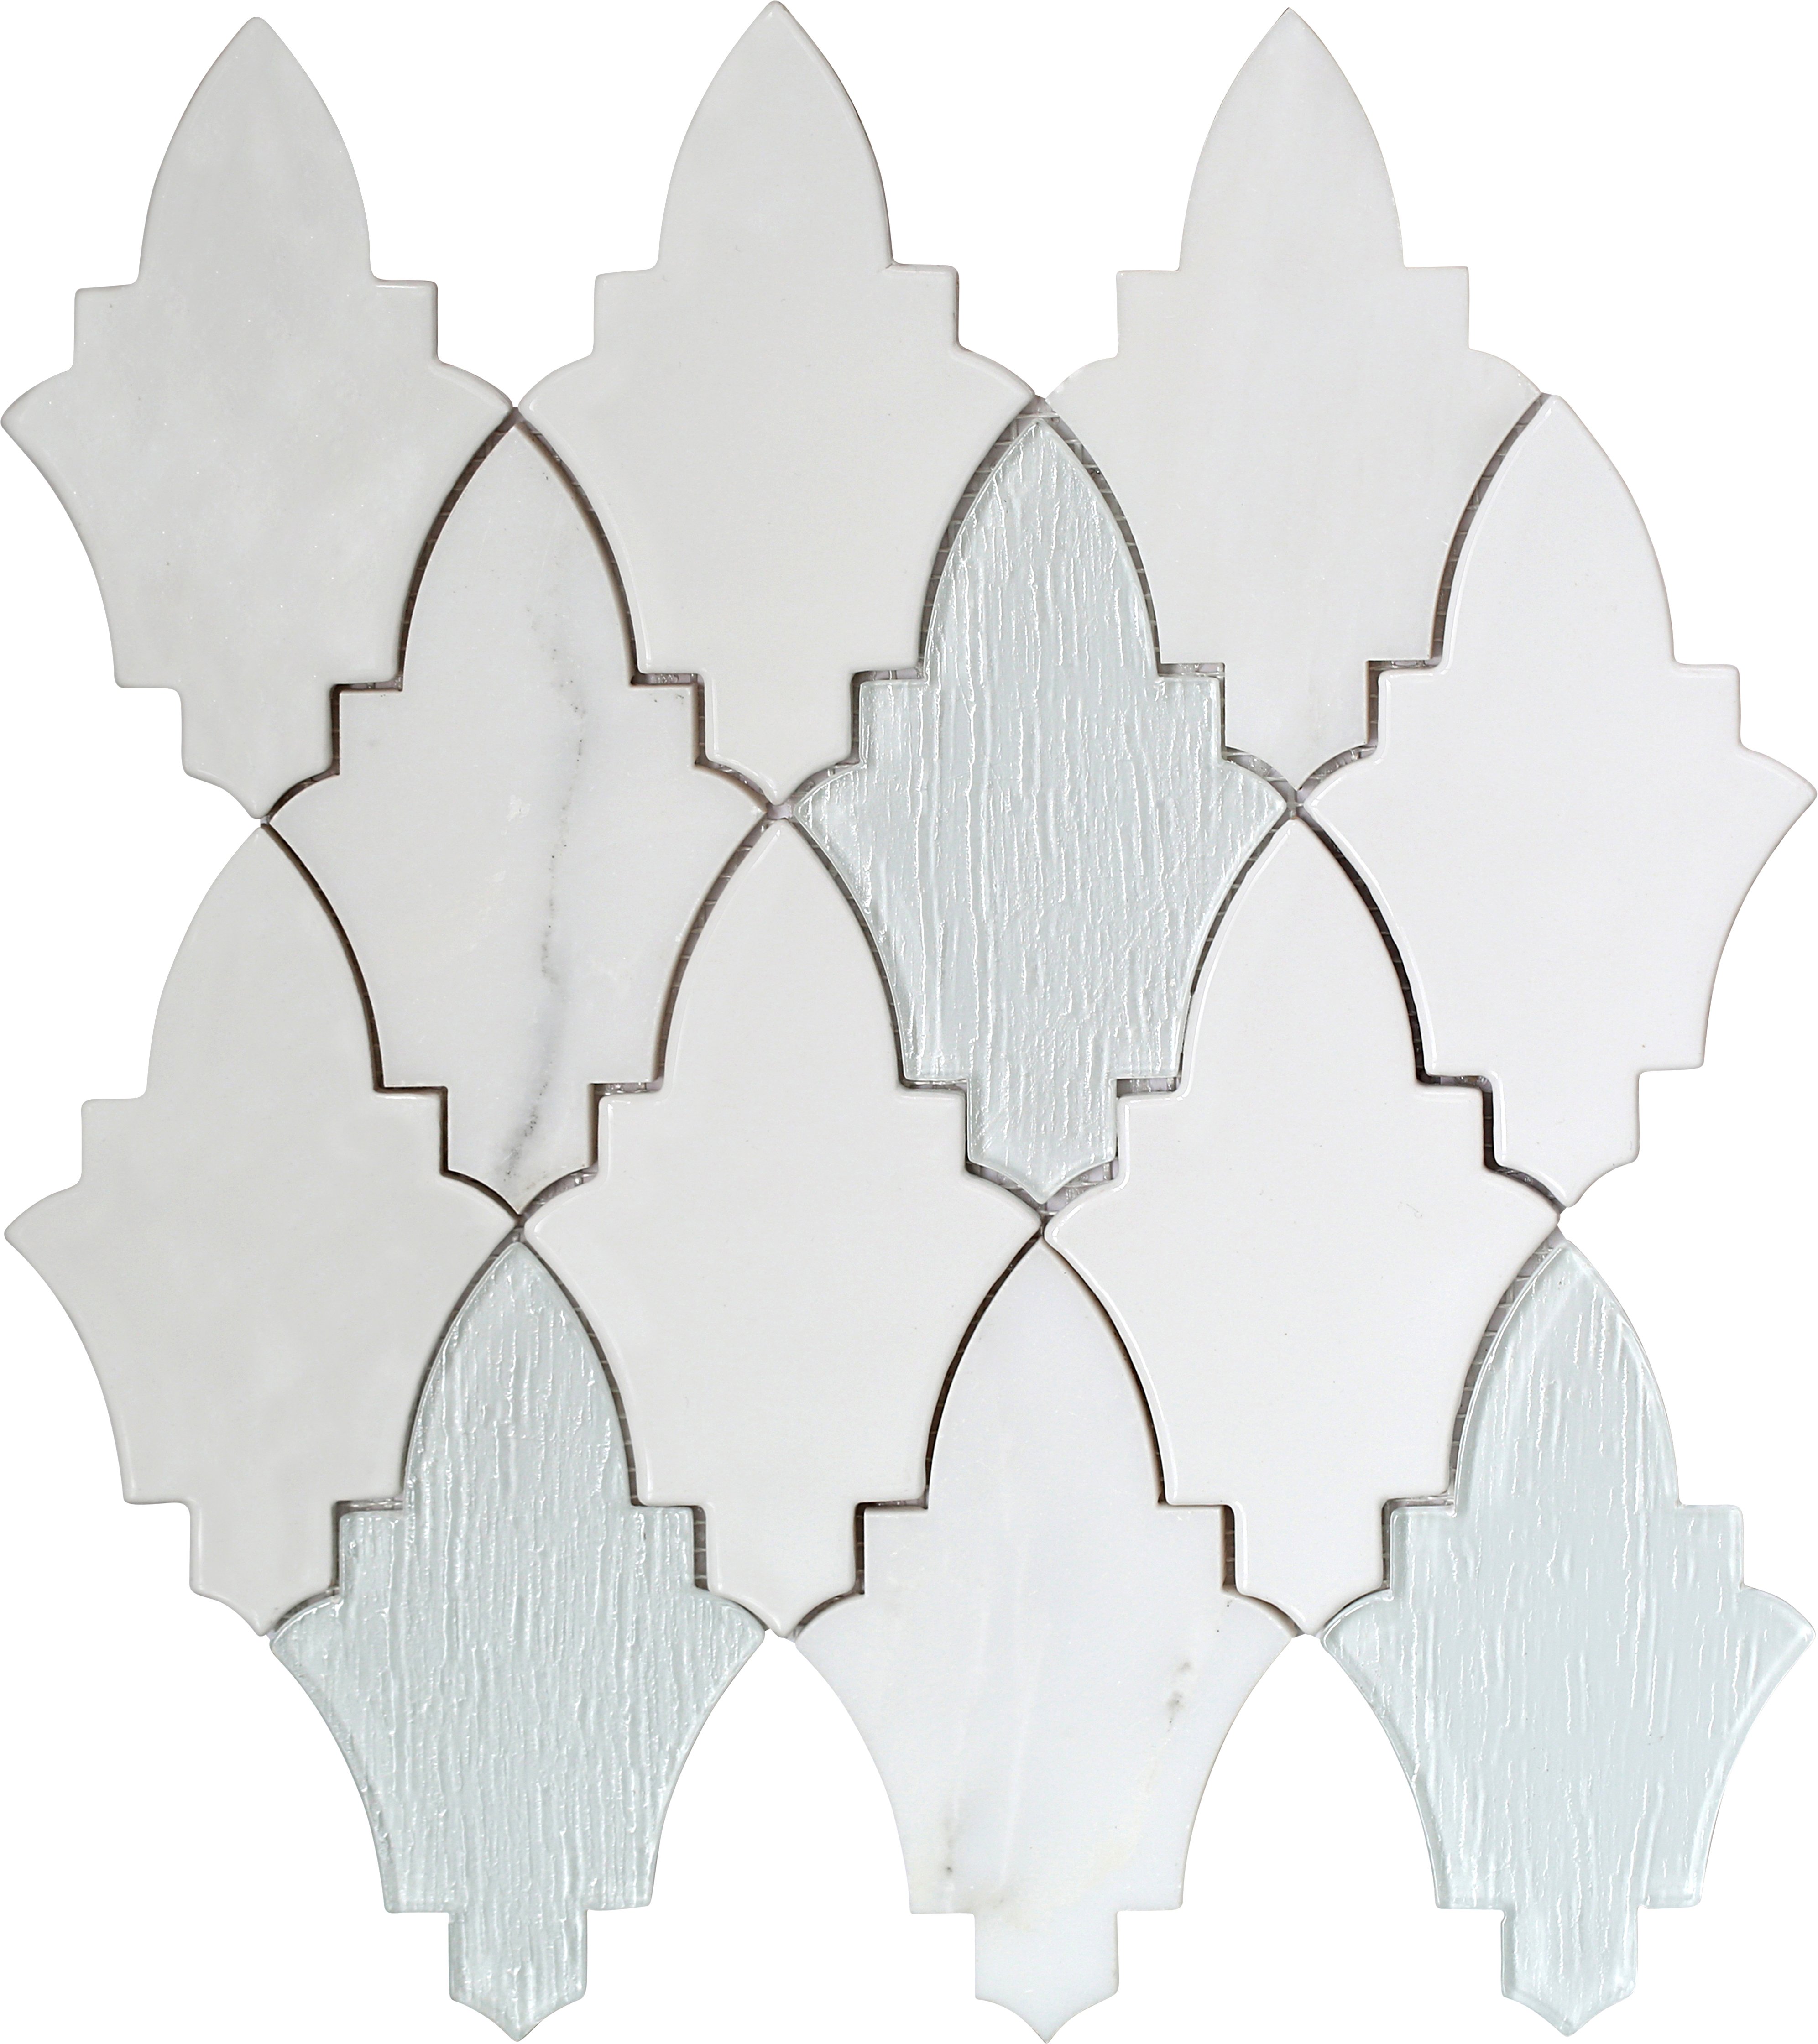 Emser FLEUR AFFODILL stone, ceramic and glass mix mosaic tile 11X12 gloss W94FLEUAF1112MO is an Emser tile product.  Emser Tile Fleur is a modified arabesque mosaic tile and its composed of stone, ceramic and glass.   This gorgeous Emser tile Fleur or flo